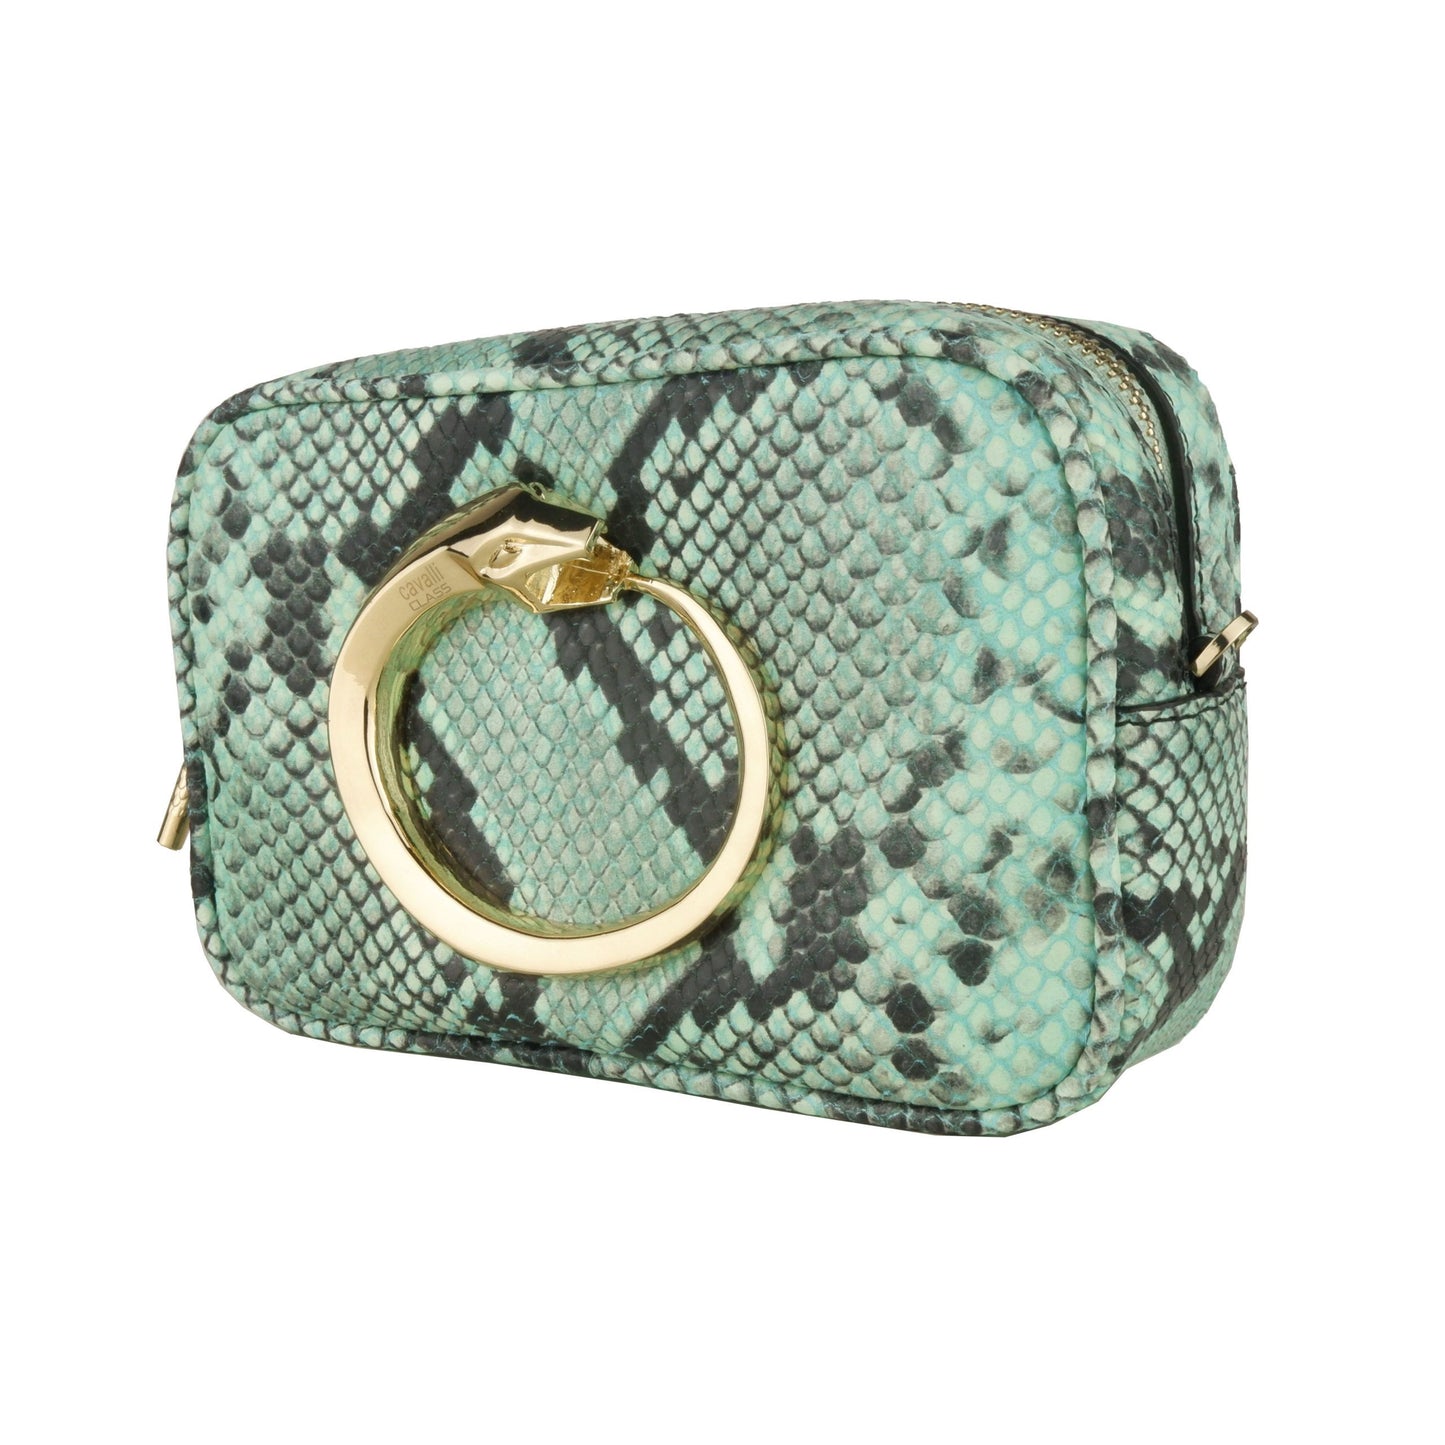 Turquoise Textured Crossbody and Belt Bag